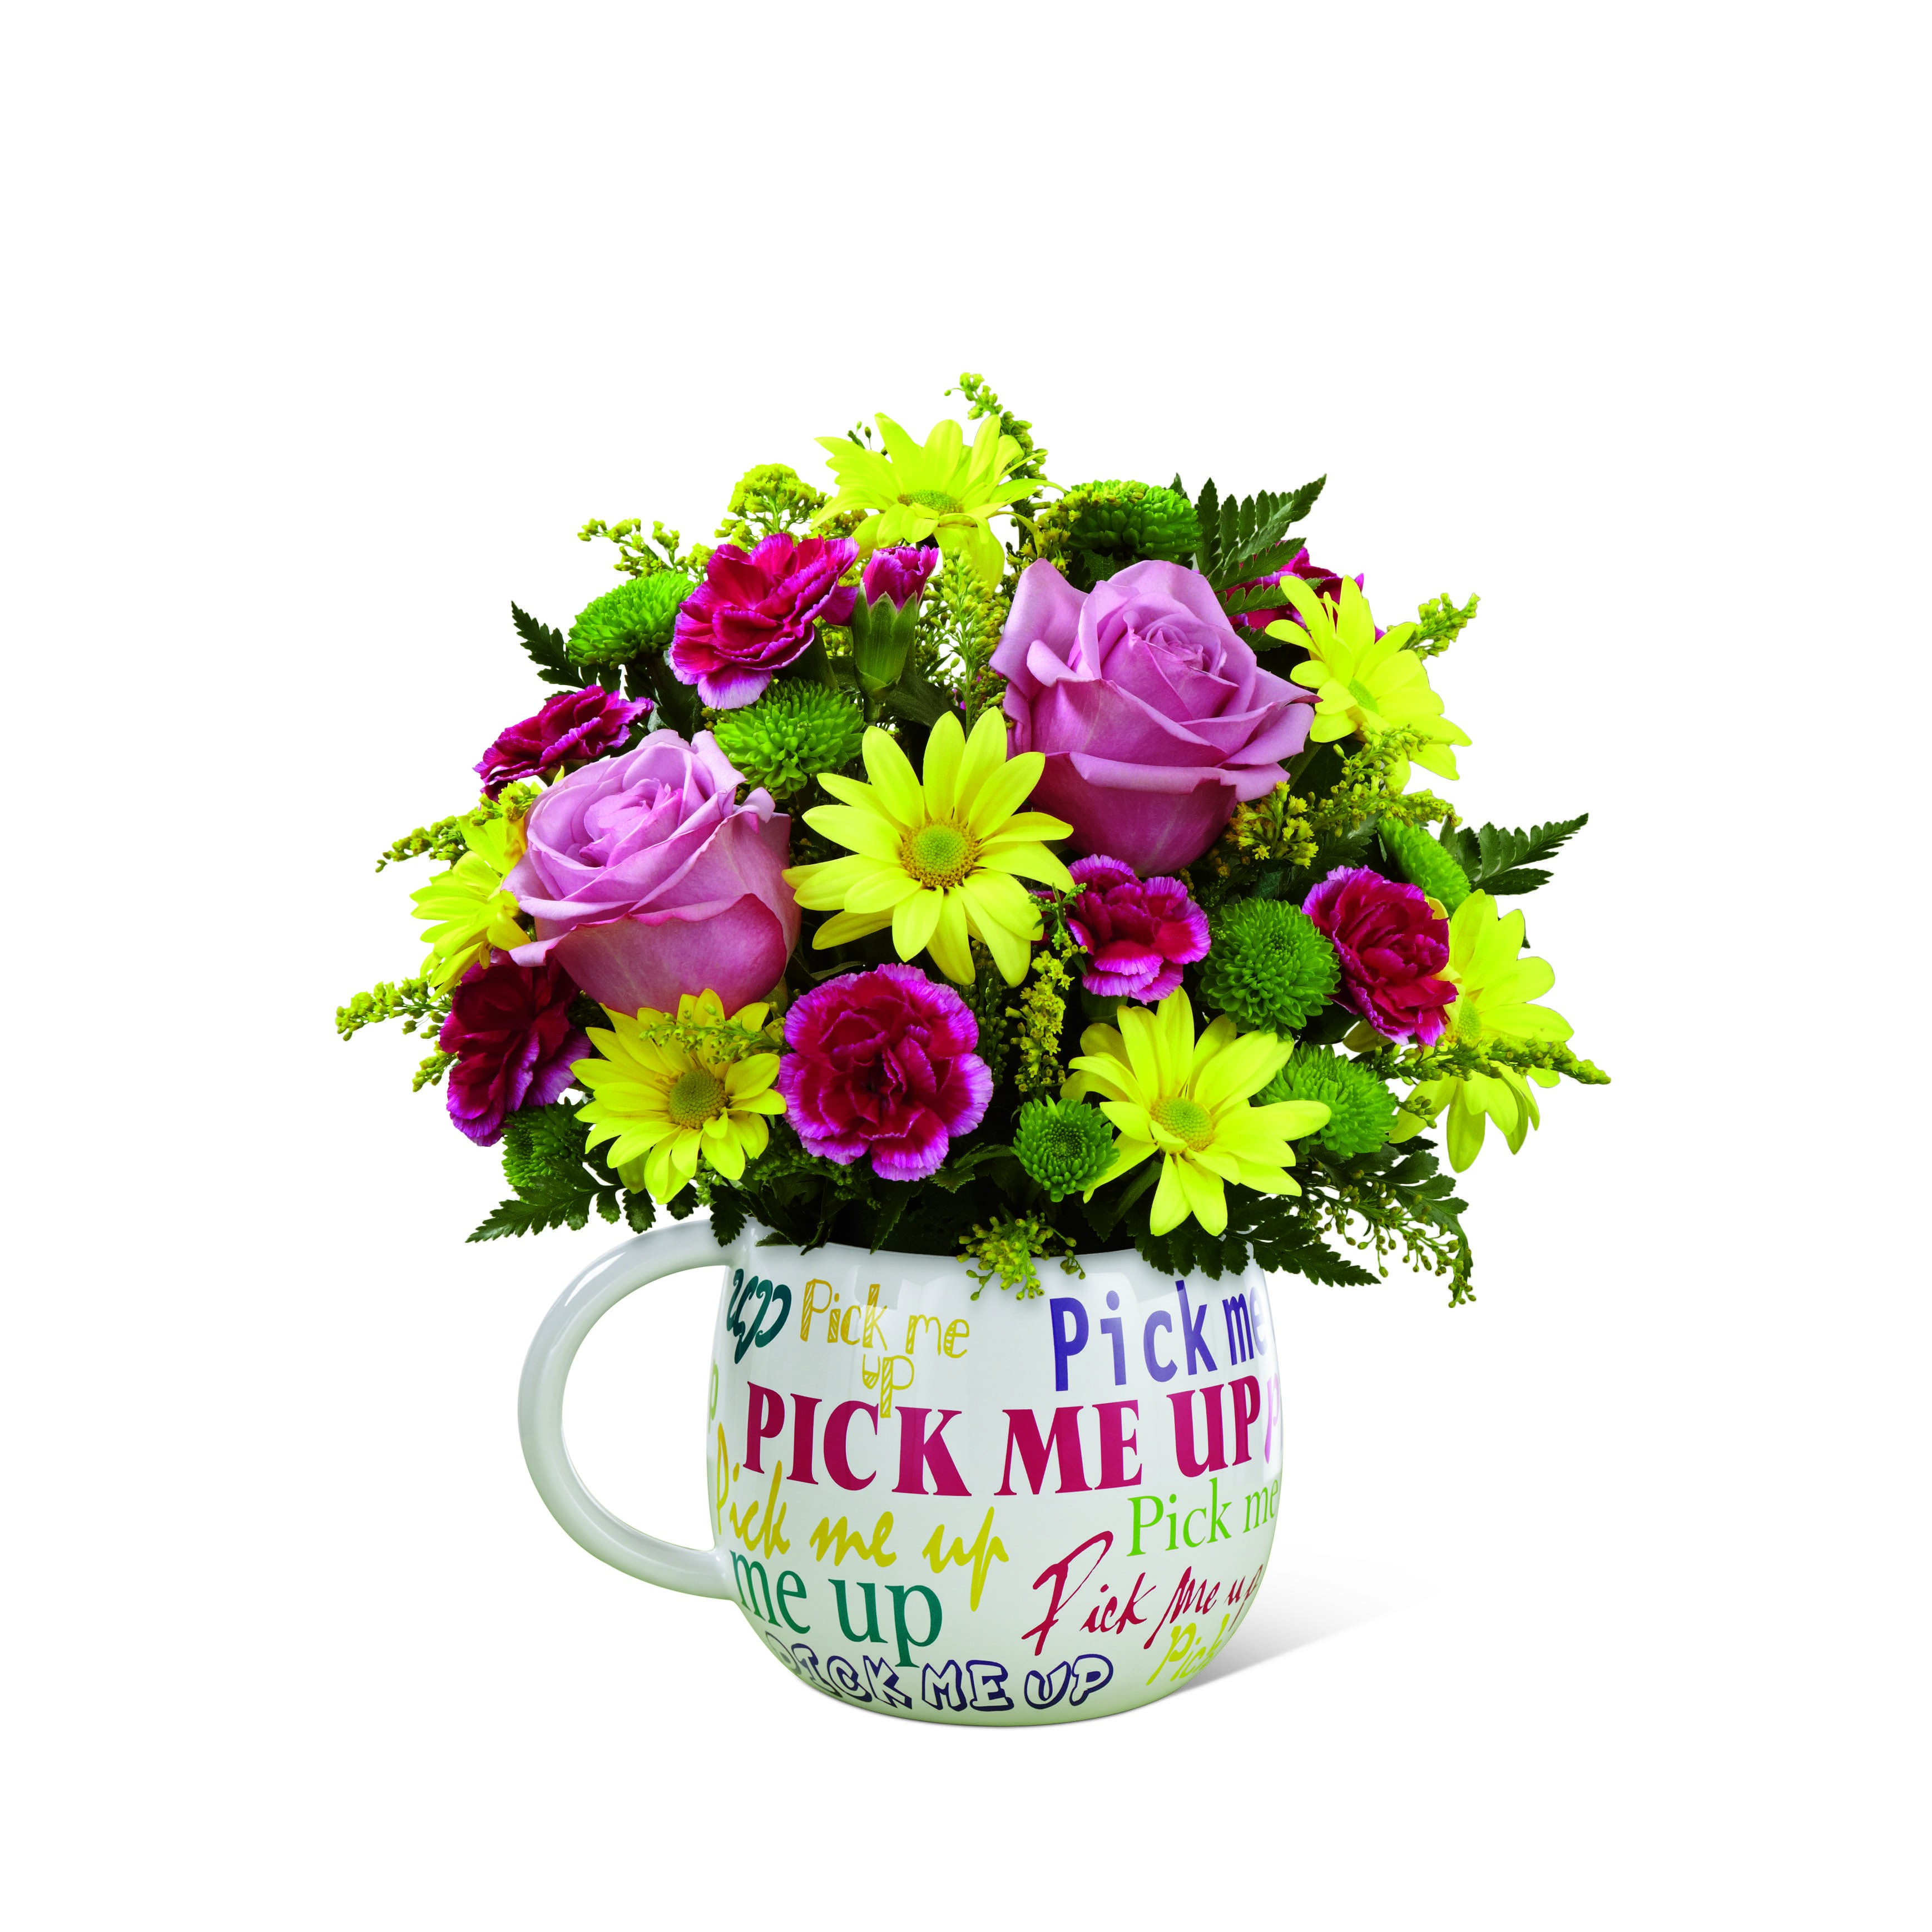 17 Ideal Ftd Cross Vase 2022 free download ftd cross vase of the ftda pick me upa bouquet in new bedford ma garlington florist throughout the ftda pick me upa bouquet